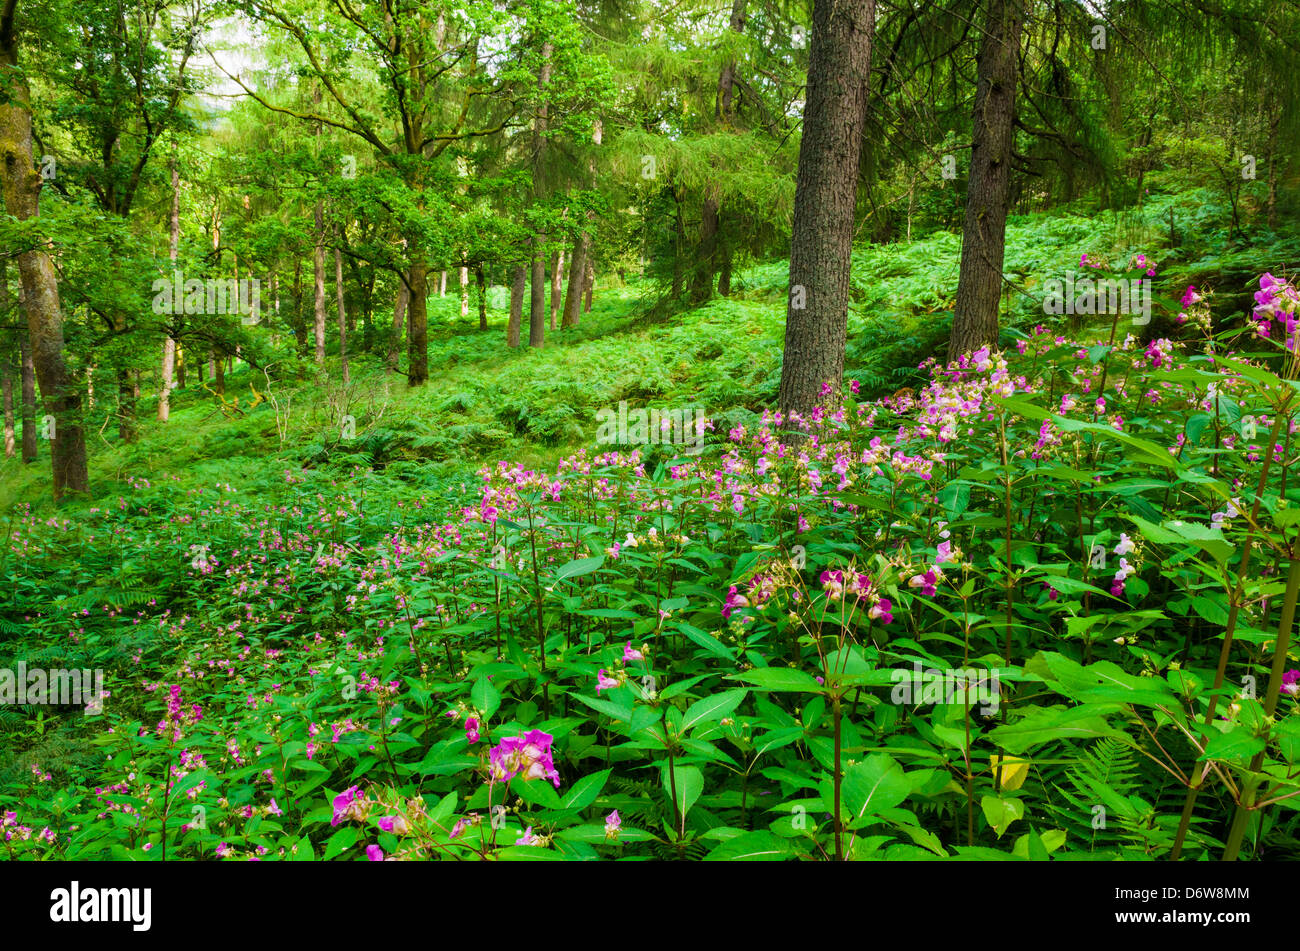 Himalayan Balsam. A non-native invasive species in the UK growing in woodland in the Lake District, Cumbria, England. Stock Photo